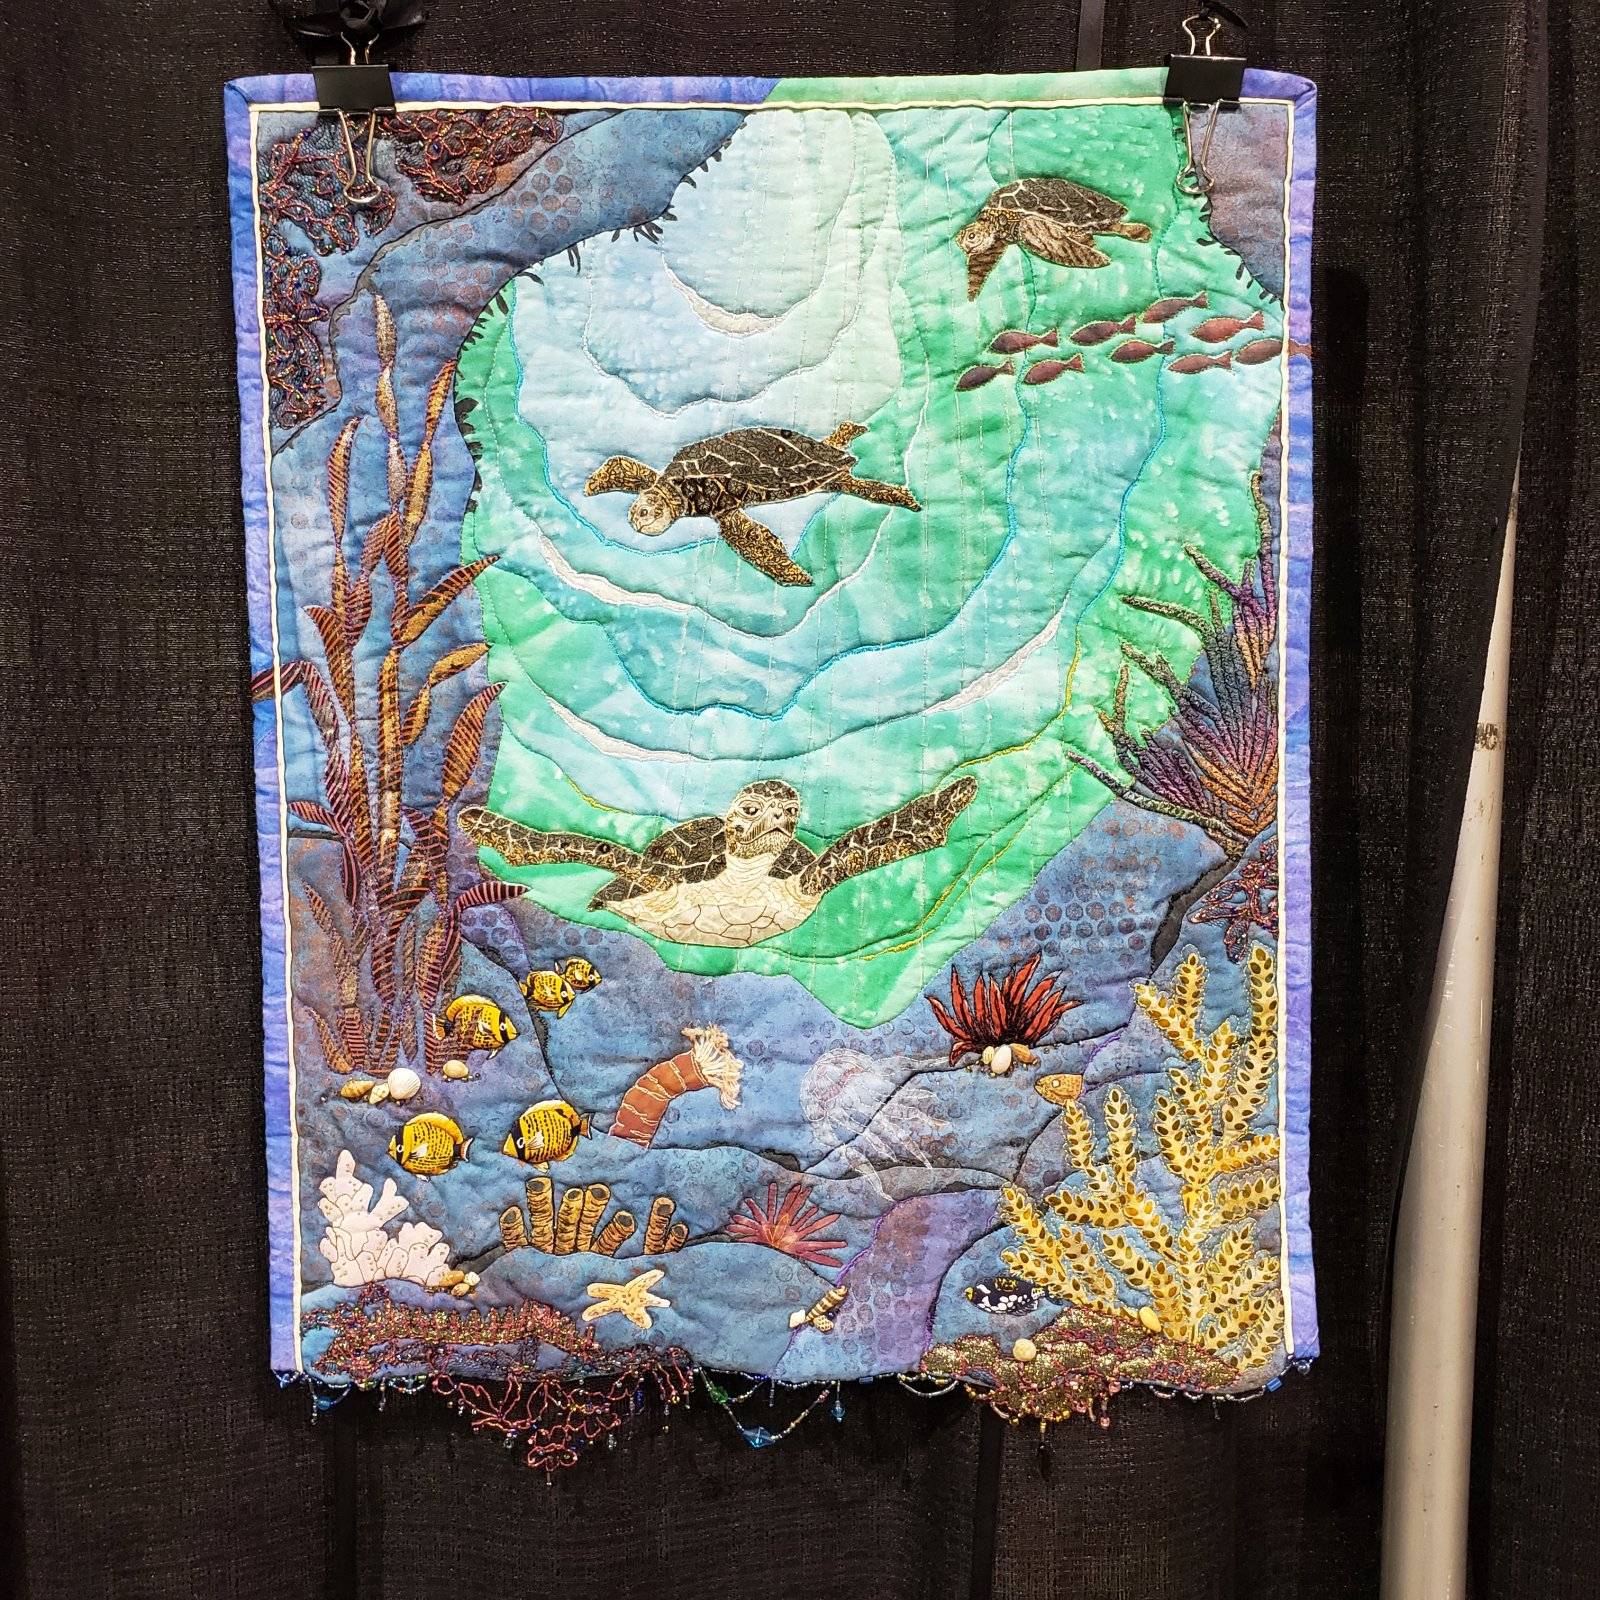 Hand Embroidery Quilt Patterns 2019 Quilt Show Quilts Group 2 Of 2 Public Pictures Only